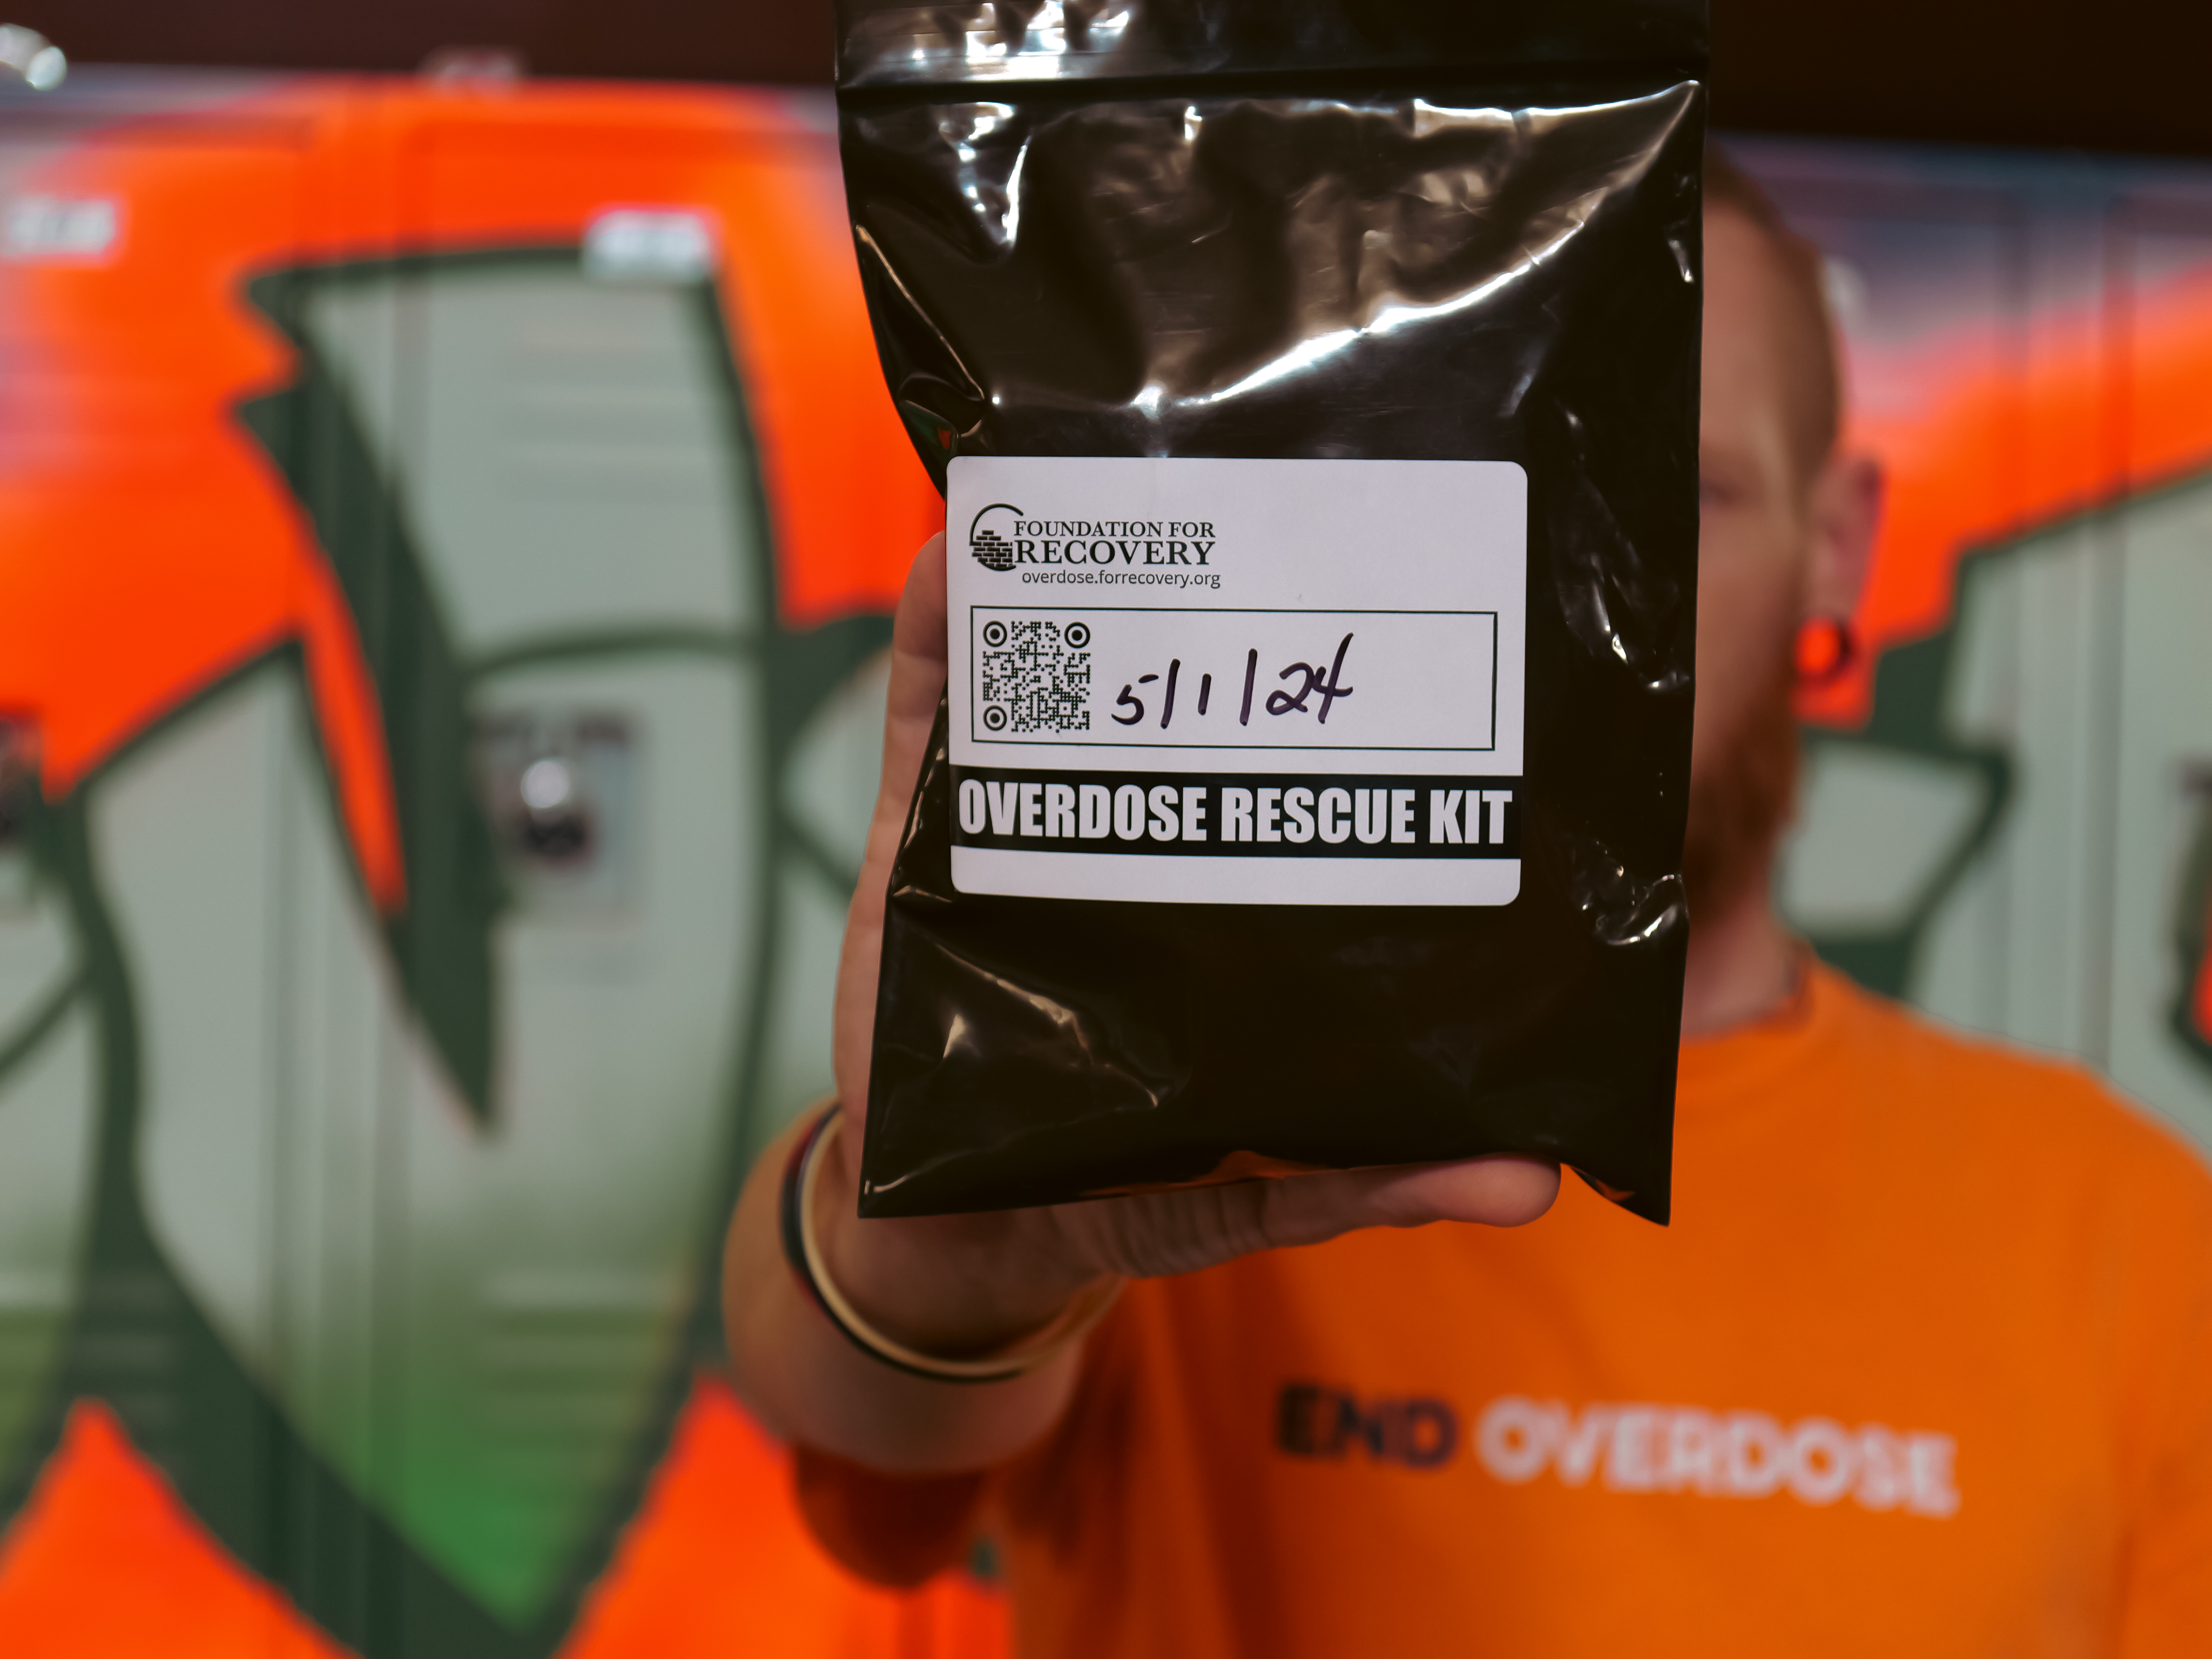 Overdose prevention ambassador and community trainer Chris Marx of Foundation for Recovery in Las Vegas holds an overdose rescue kit with the opioid overdose reversal medication, naloxone. (Sean O'Donnell/ Foundation for Recovery)